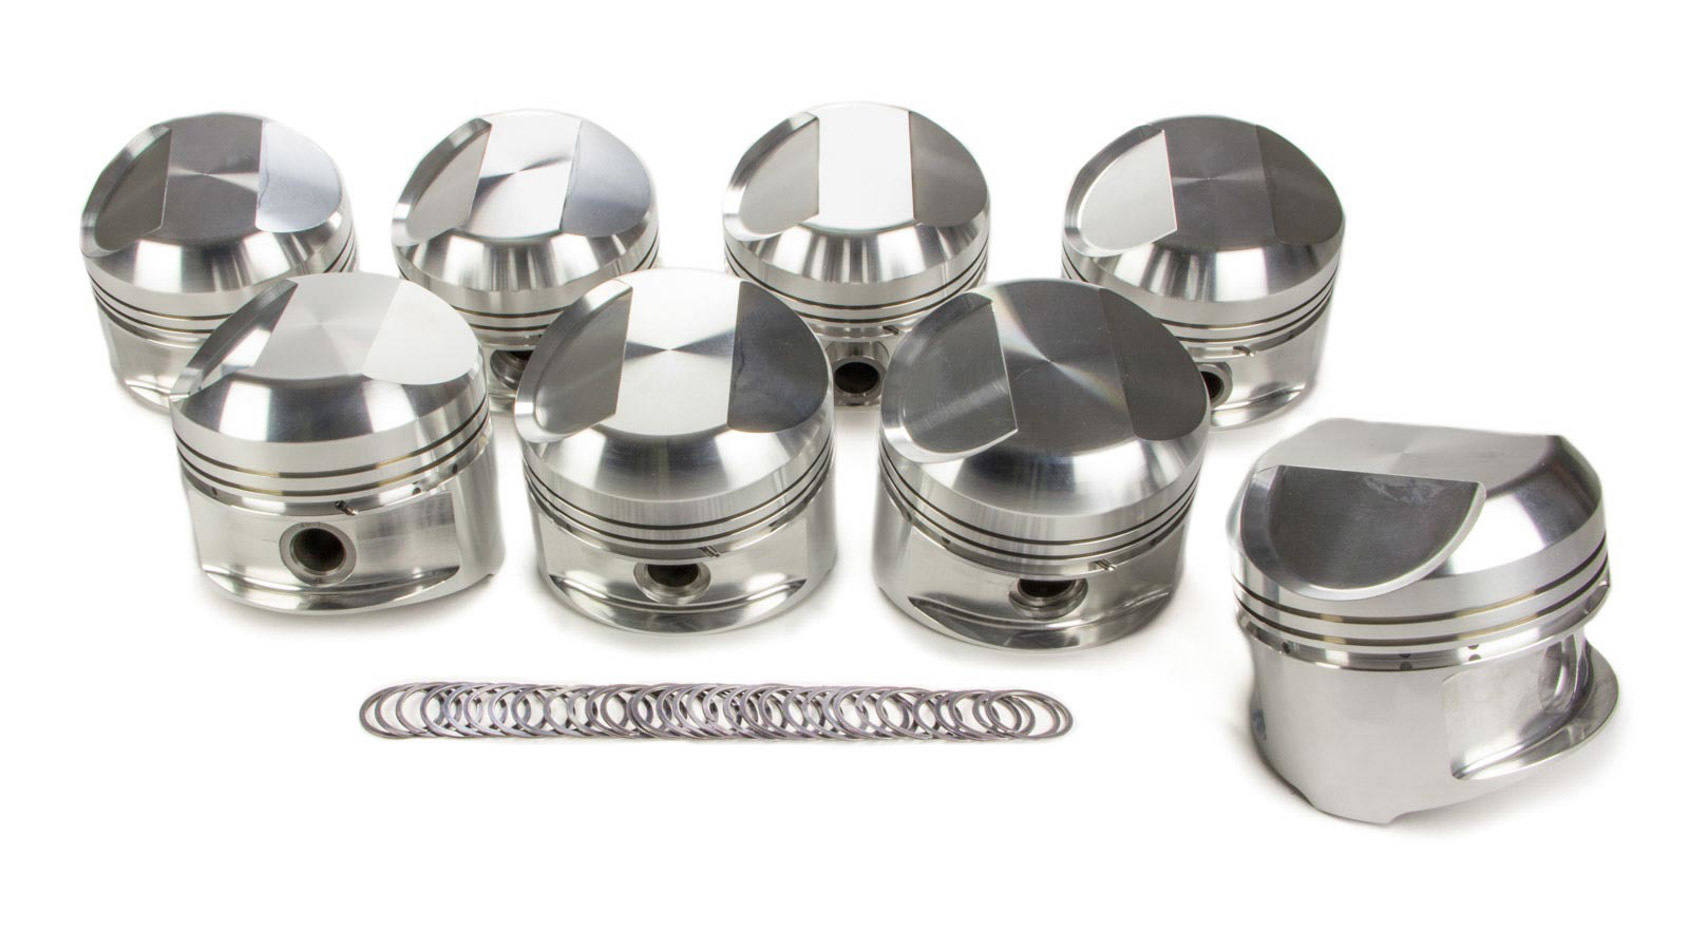 JE Pistons 118758 Piston, 426 Hemi Dome, 2 Valve Reliefs, Forged Aluminum, 4.280 in Bore, 5/64 x 5/64 x 3/16 in Ring Grooves, Plus 88.00 cc, Wrist Pin Included, Mopar 426 Hemi, Set of 8